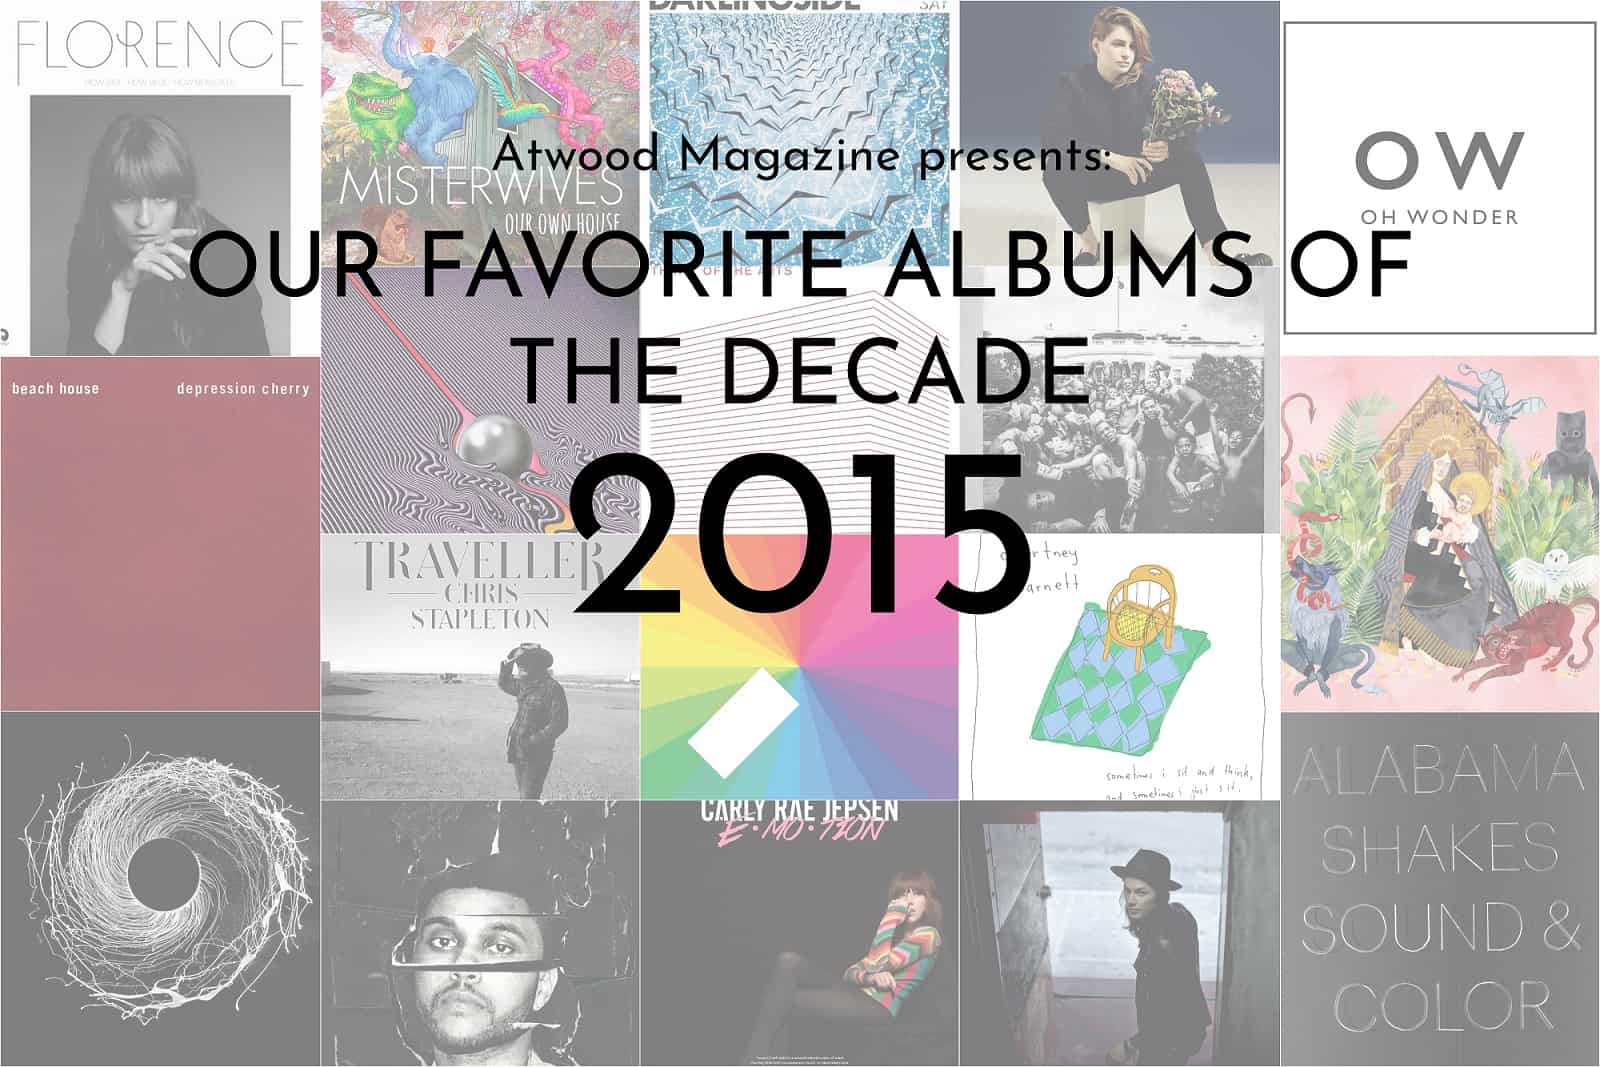 Atwood Magazine's Albums of the Decade: 2015